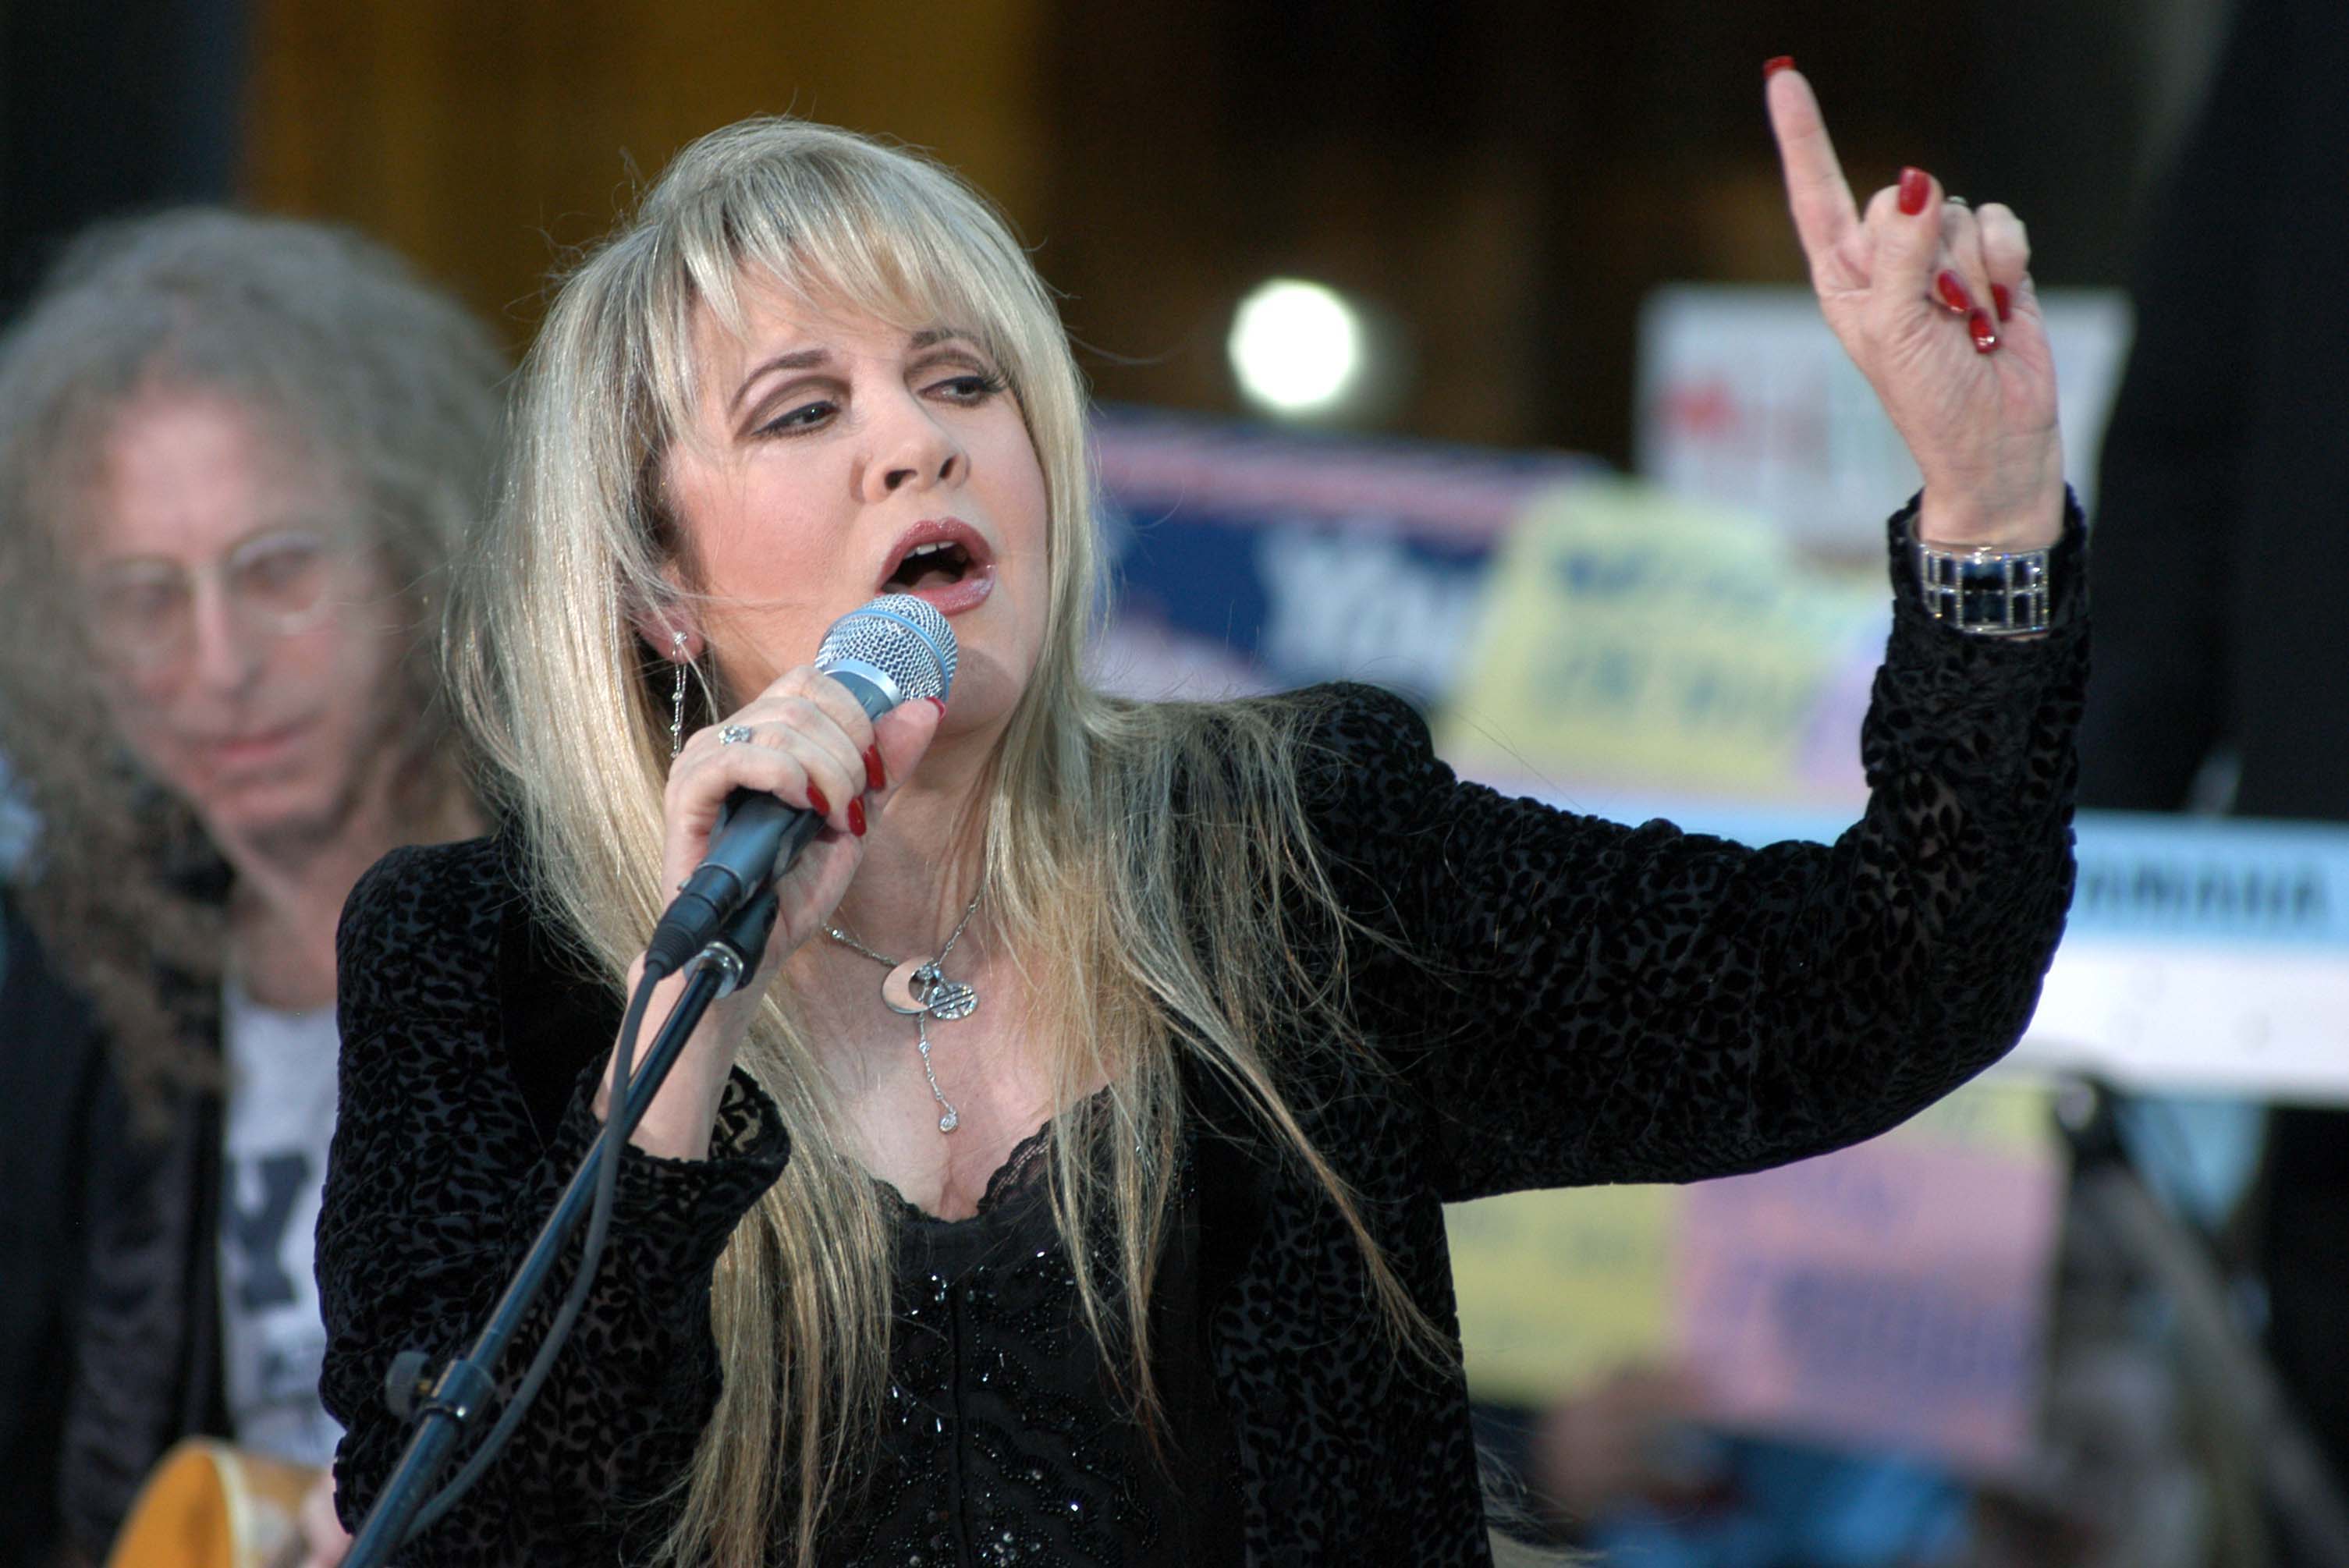 Stevie Nicks performs in a black outfit and Waddy Wachtel sits in the background